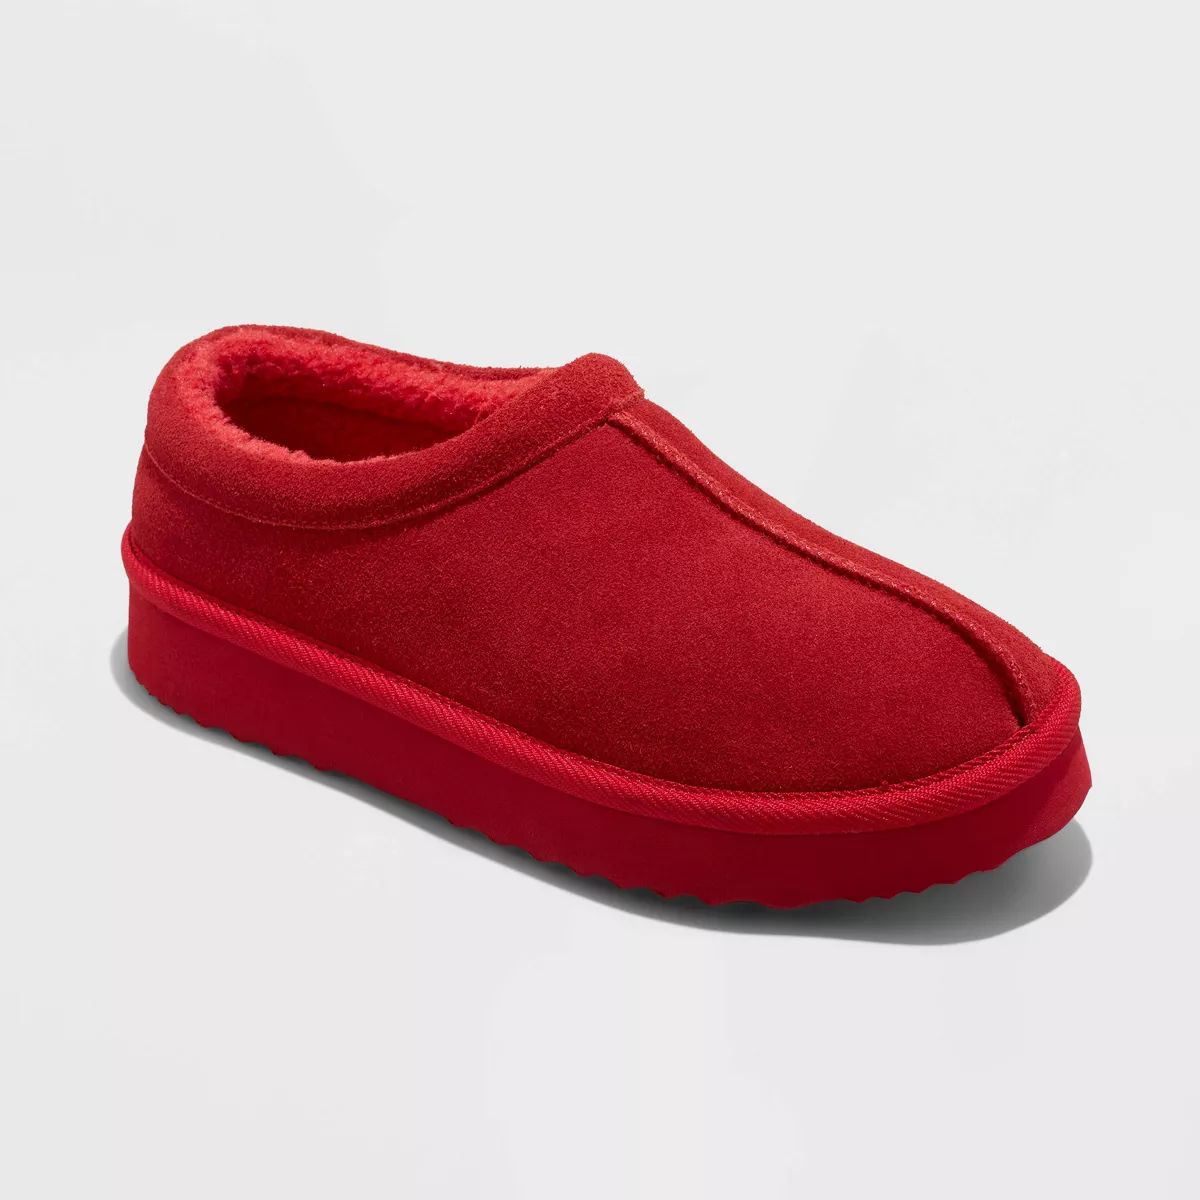 Women's Amira Suede Clog Slippers - Stars Above™ Cherry Red 6 | Target